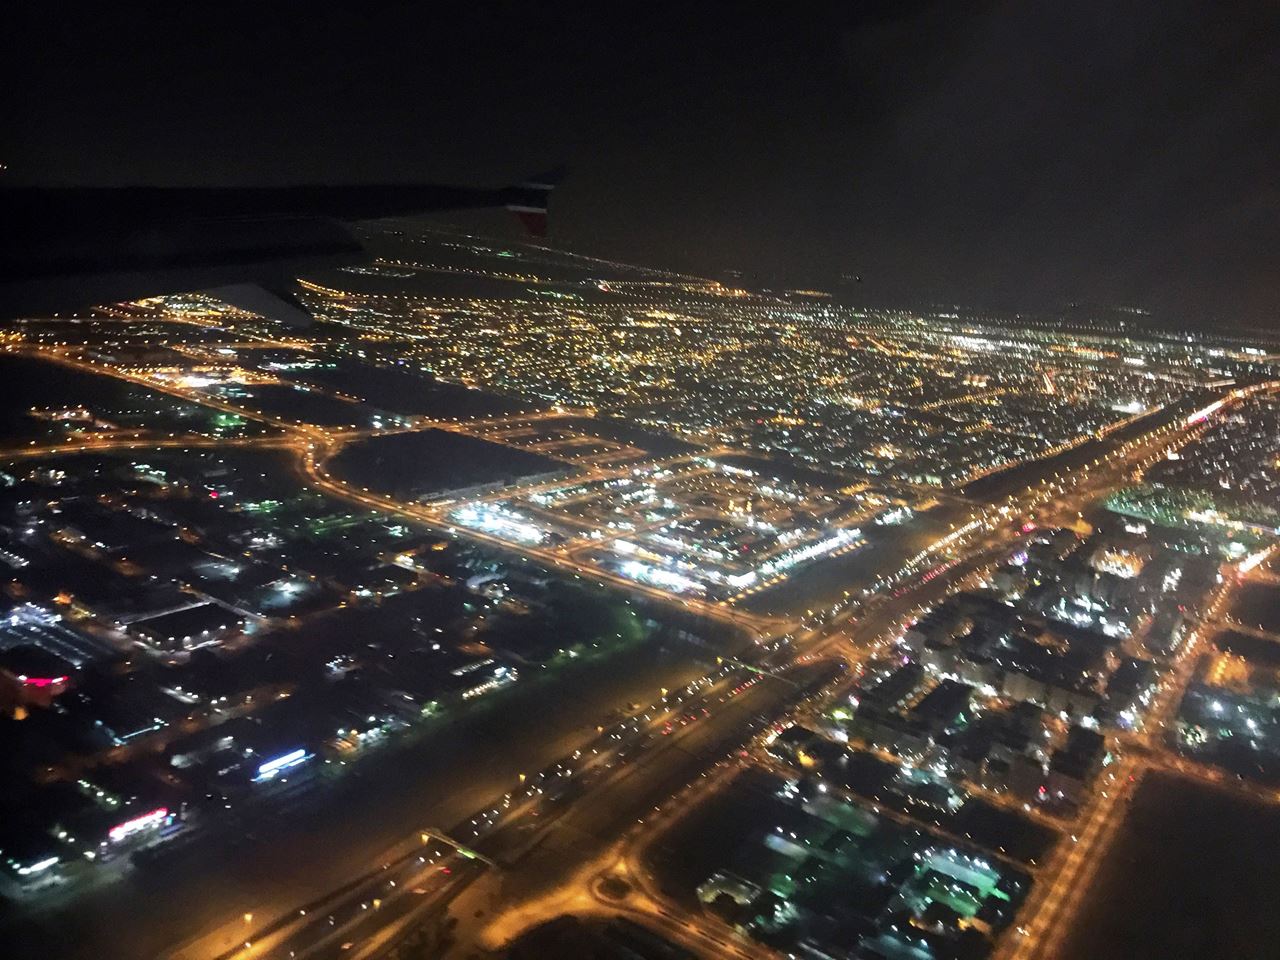 Photos of Kuwait taken from the plane during the day and night